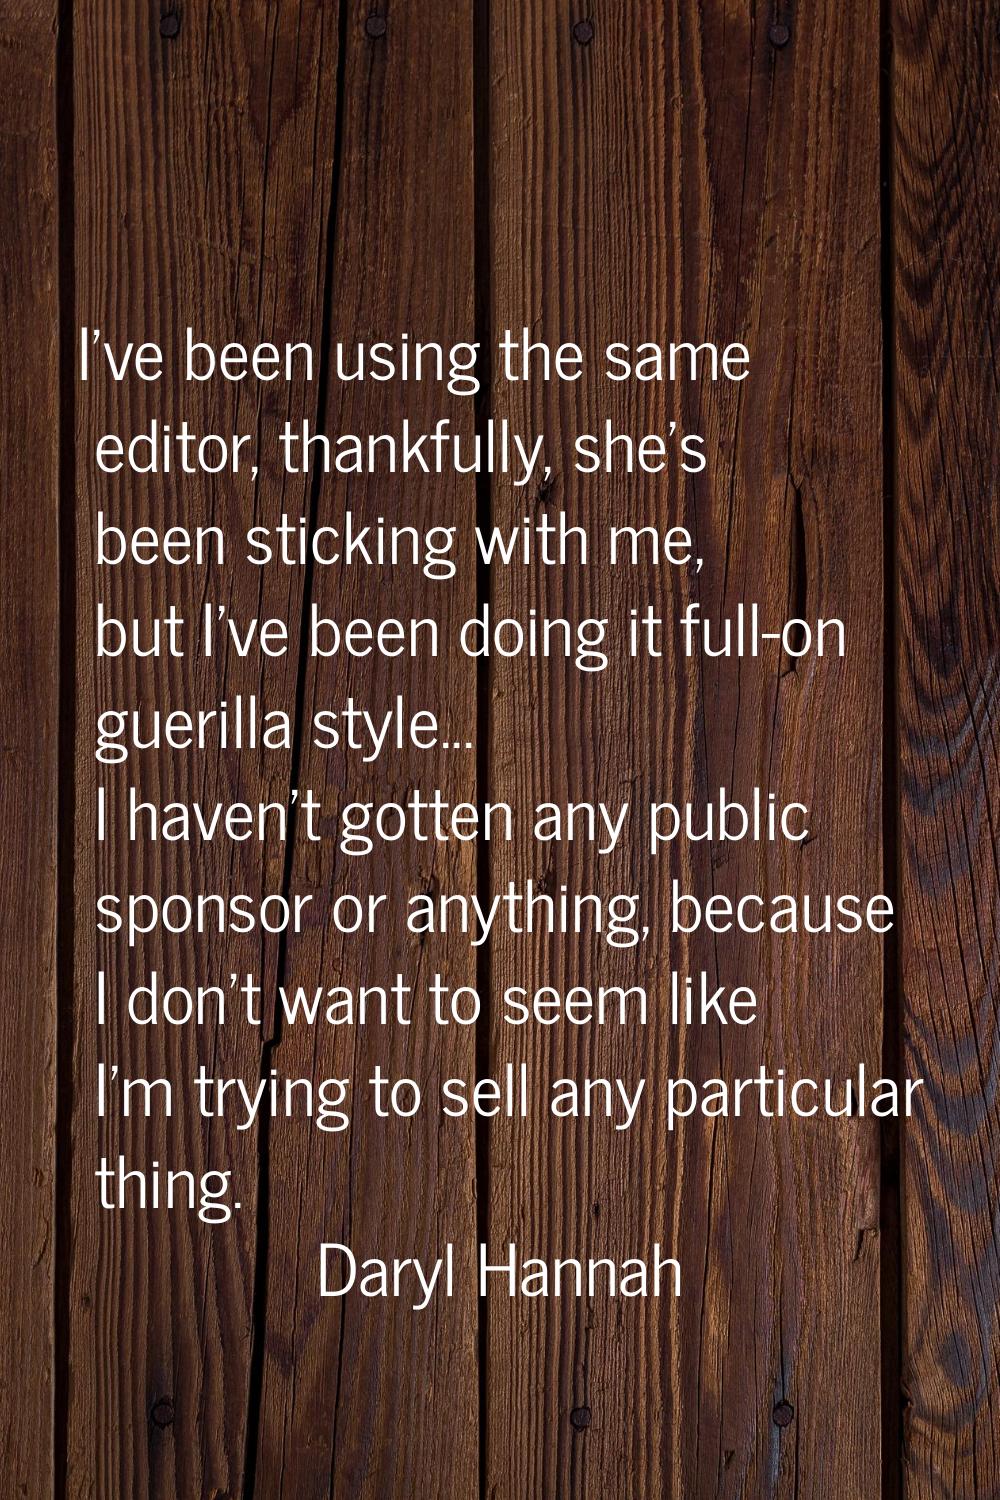 I've been using the same editor, thankfully, she's been sticking with me, but I've been doing it fu